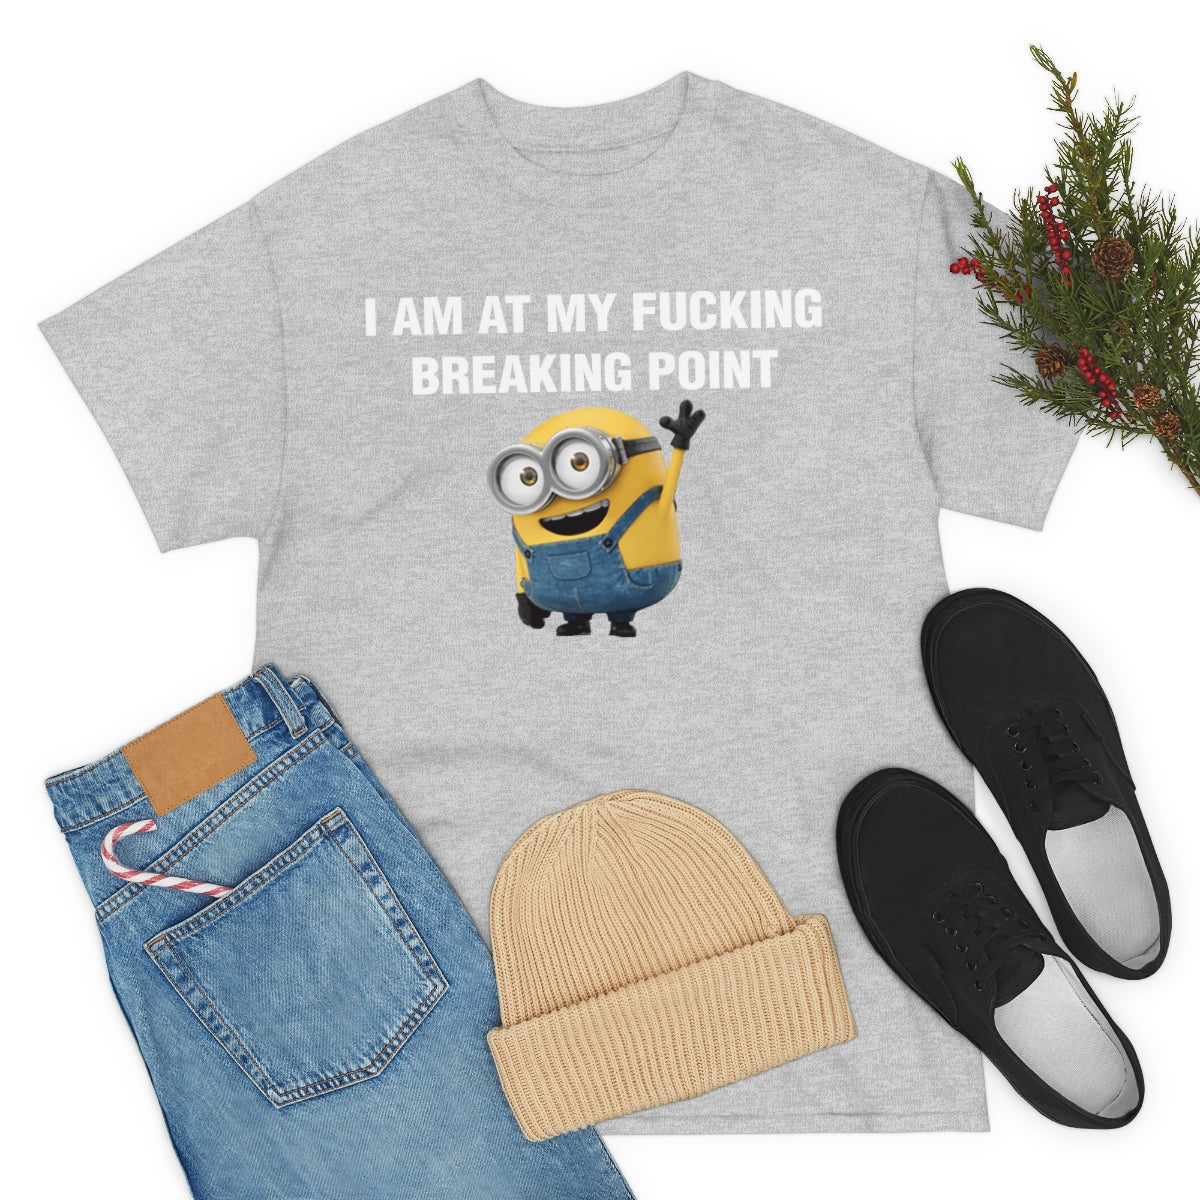 I AM AT MY FUCKING BREAKING POINT TEE